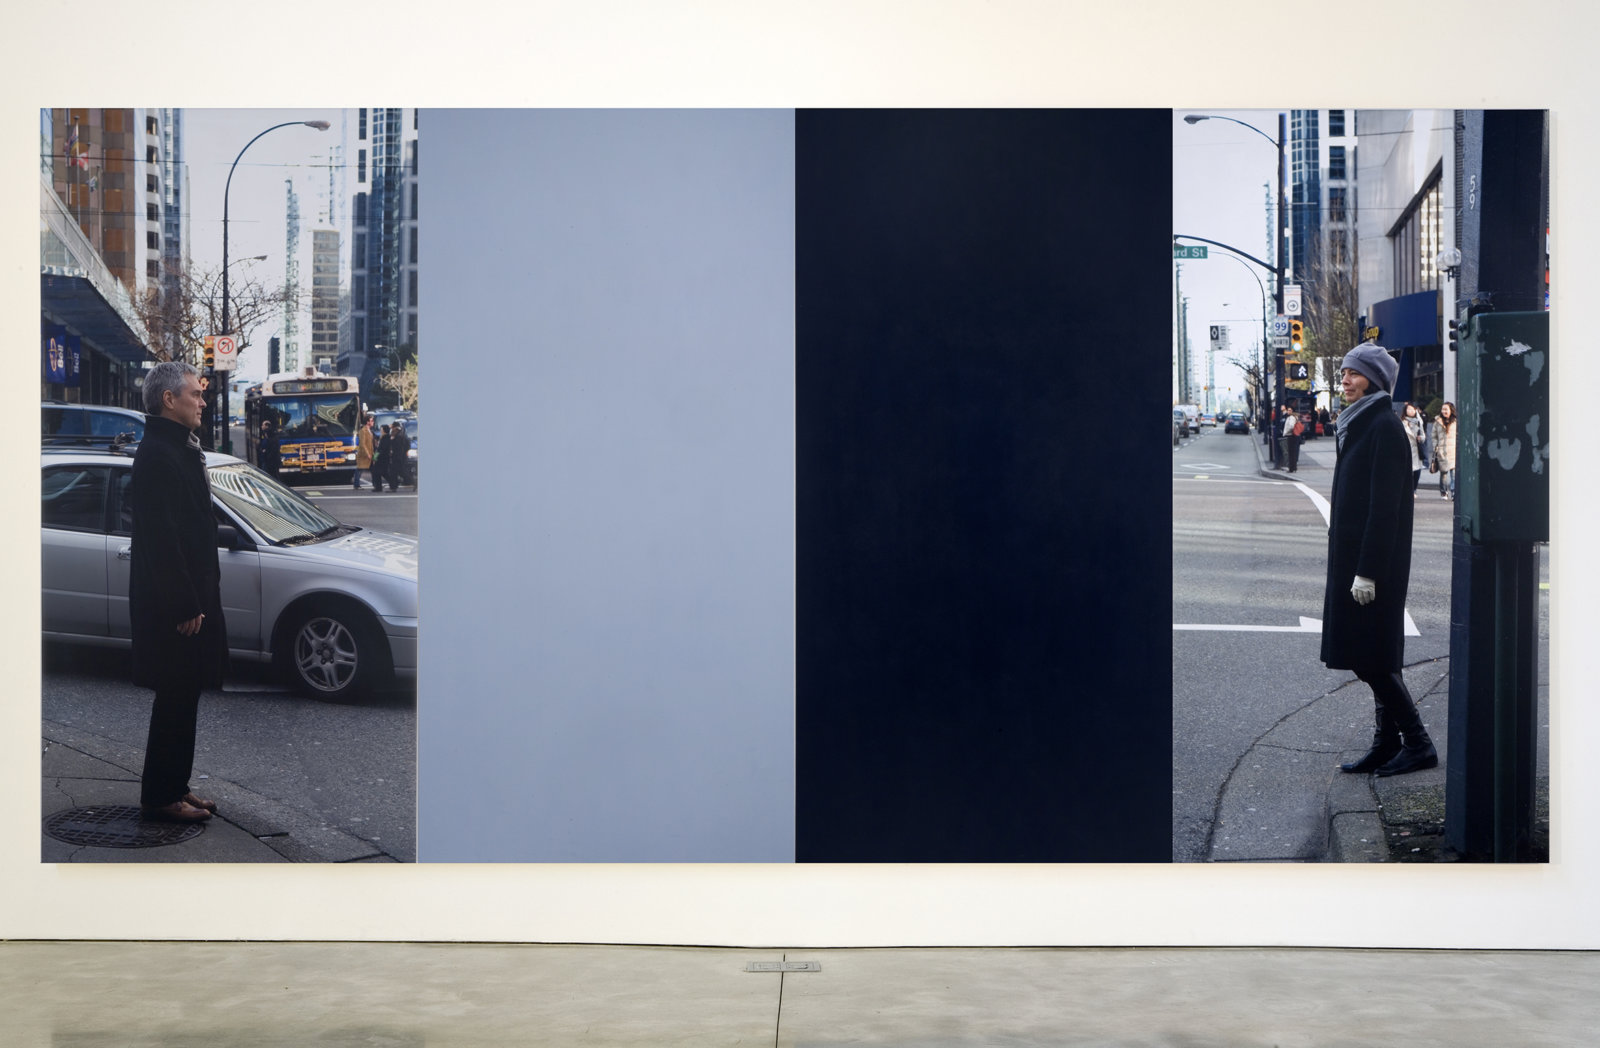 Ian Wallace, At the Crosswalk III, 2007, photolaminate and acrylic on canvas, 96 x 193 in. (244 x 488 cm)